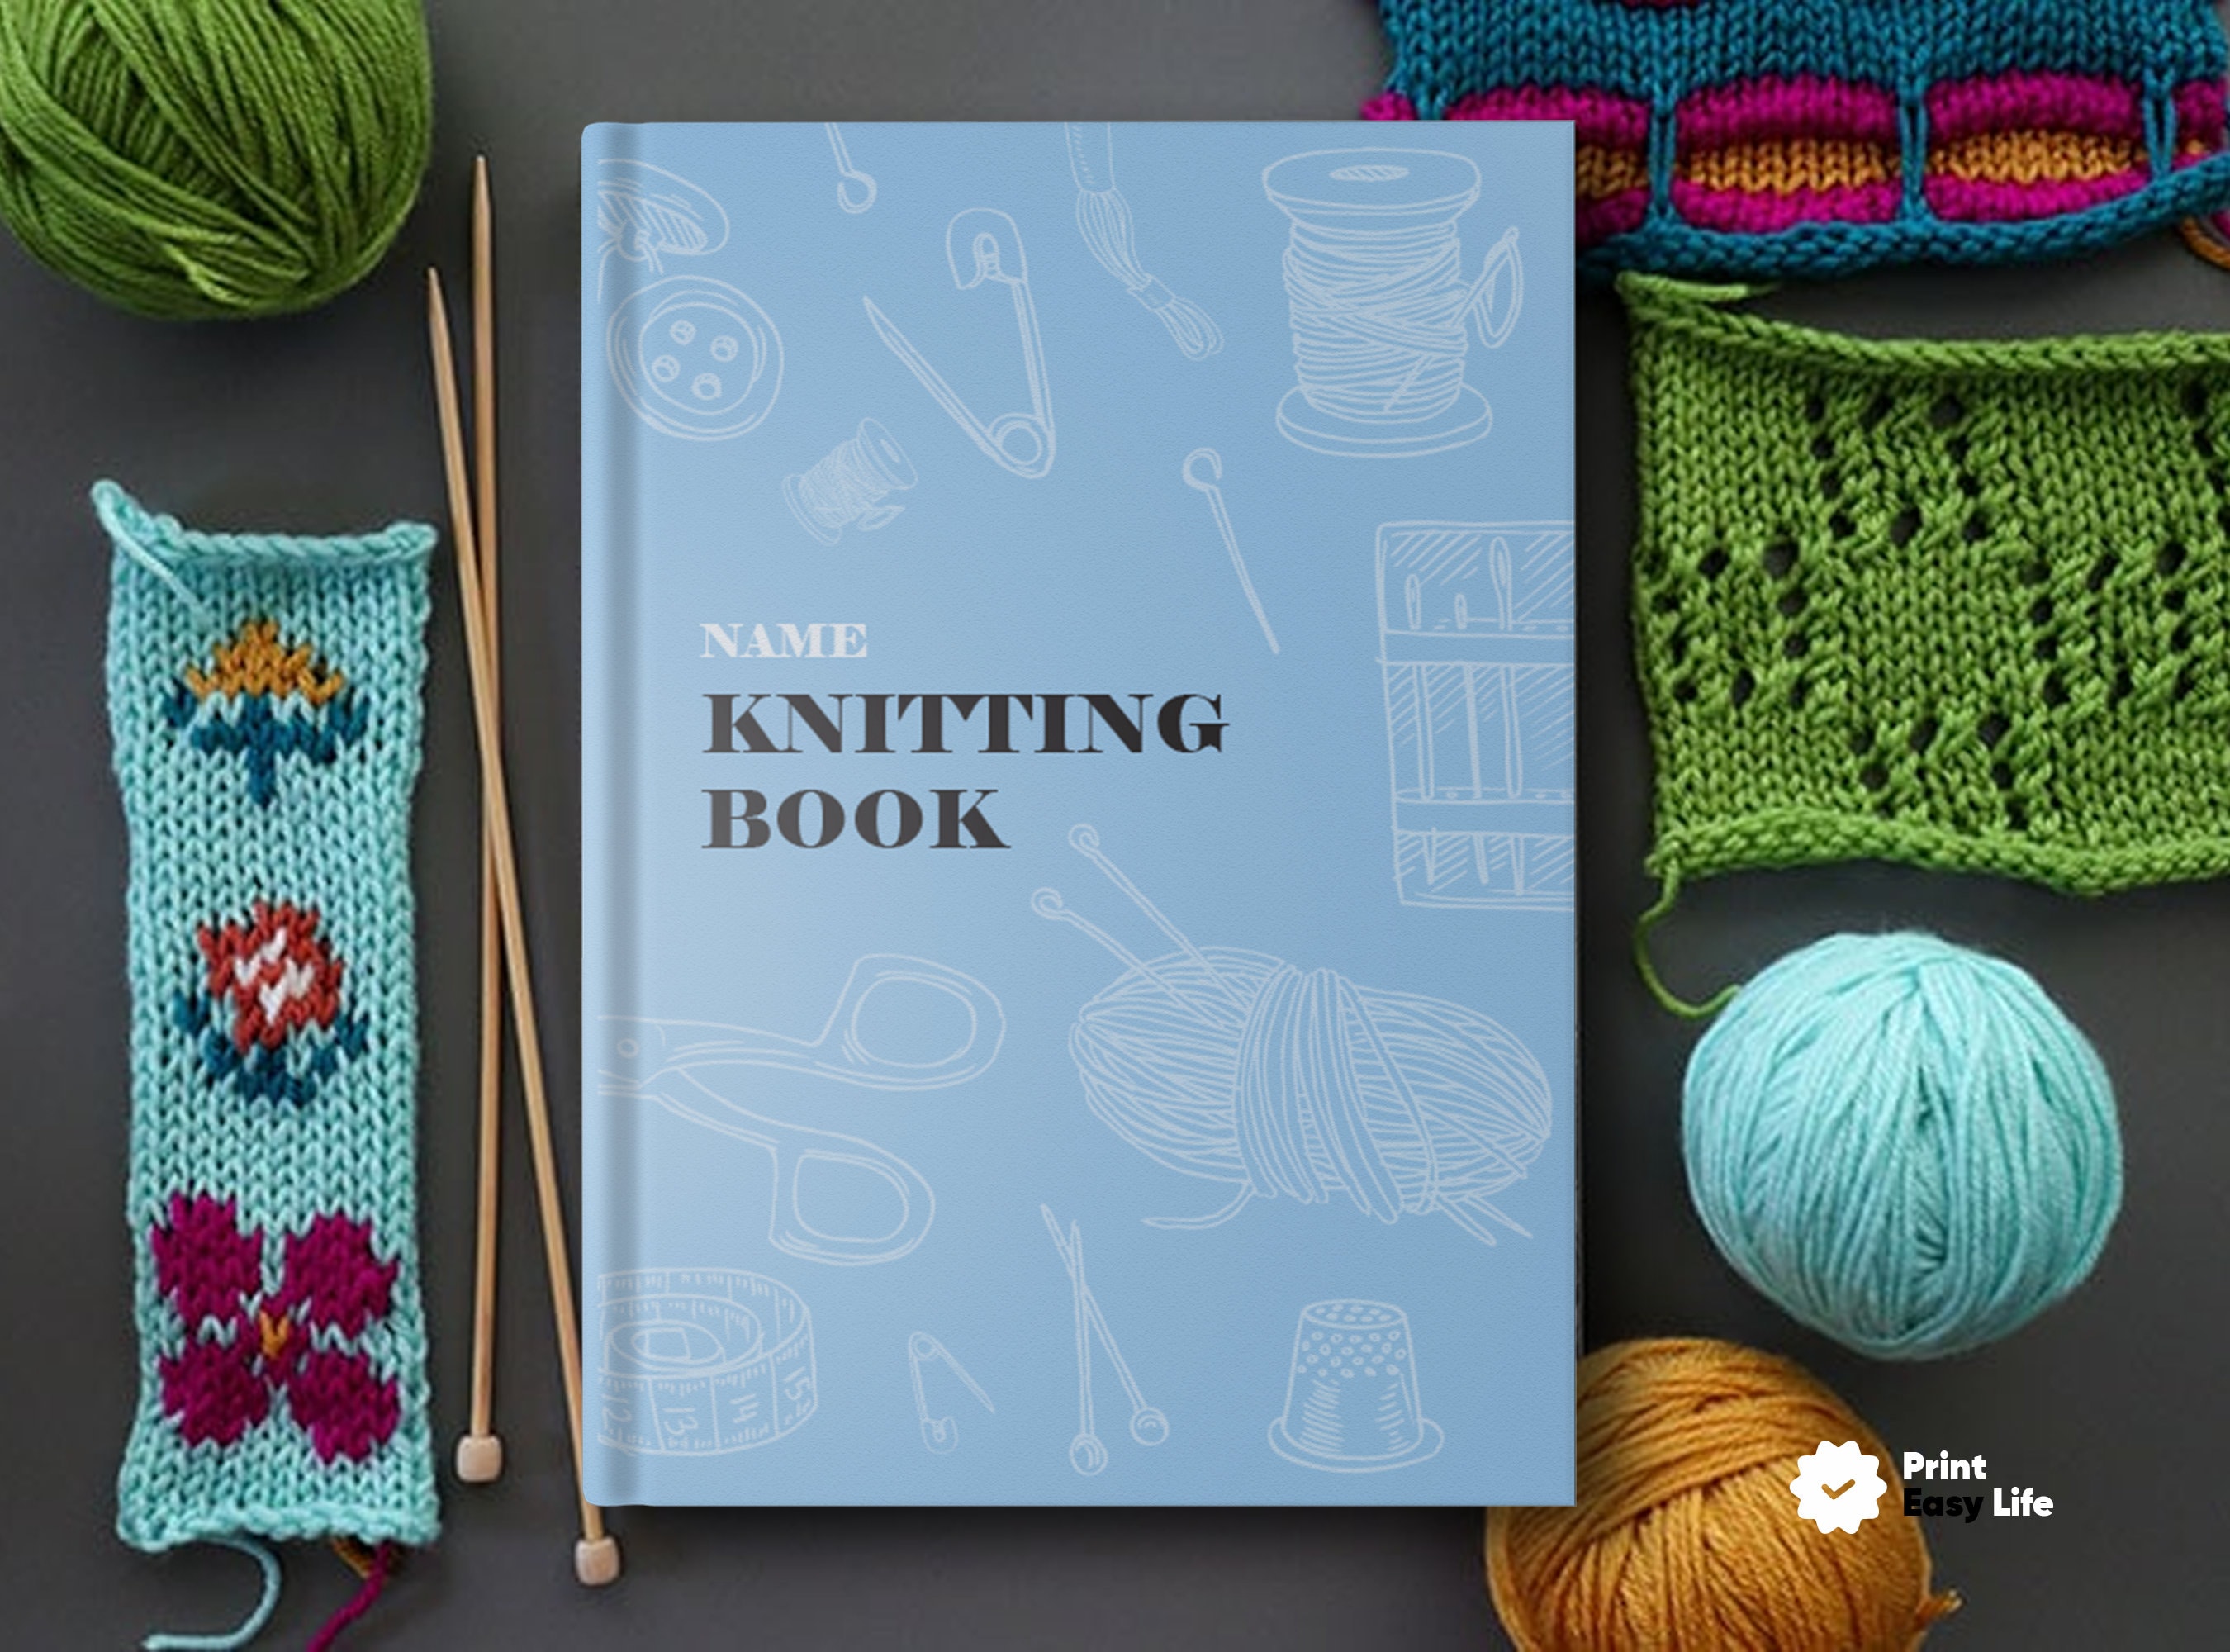 Knitting Gifts, Knitters Notebook, Yes I Really Do Need All This Yarn  Notebook, Crocheting Gifts, Crochet Gift, Funny Knitting Notebook Gift 